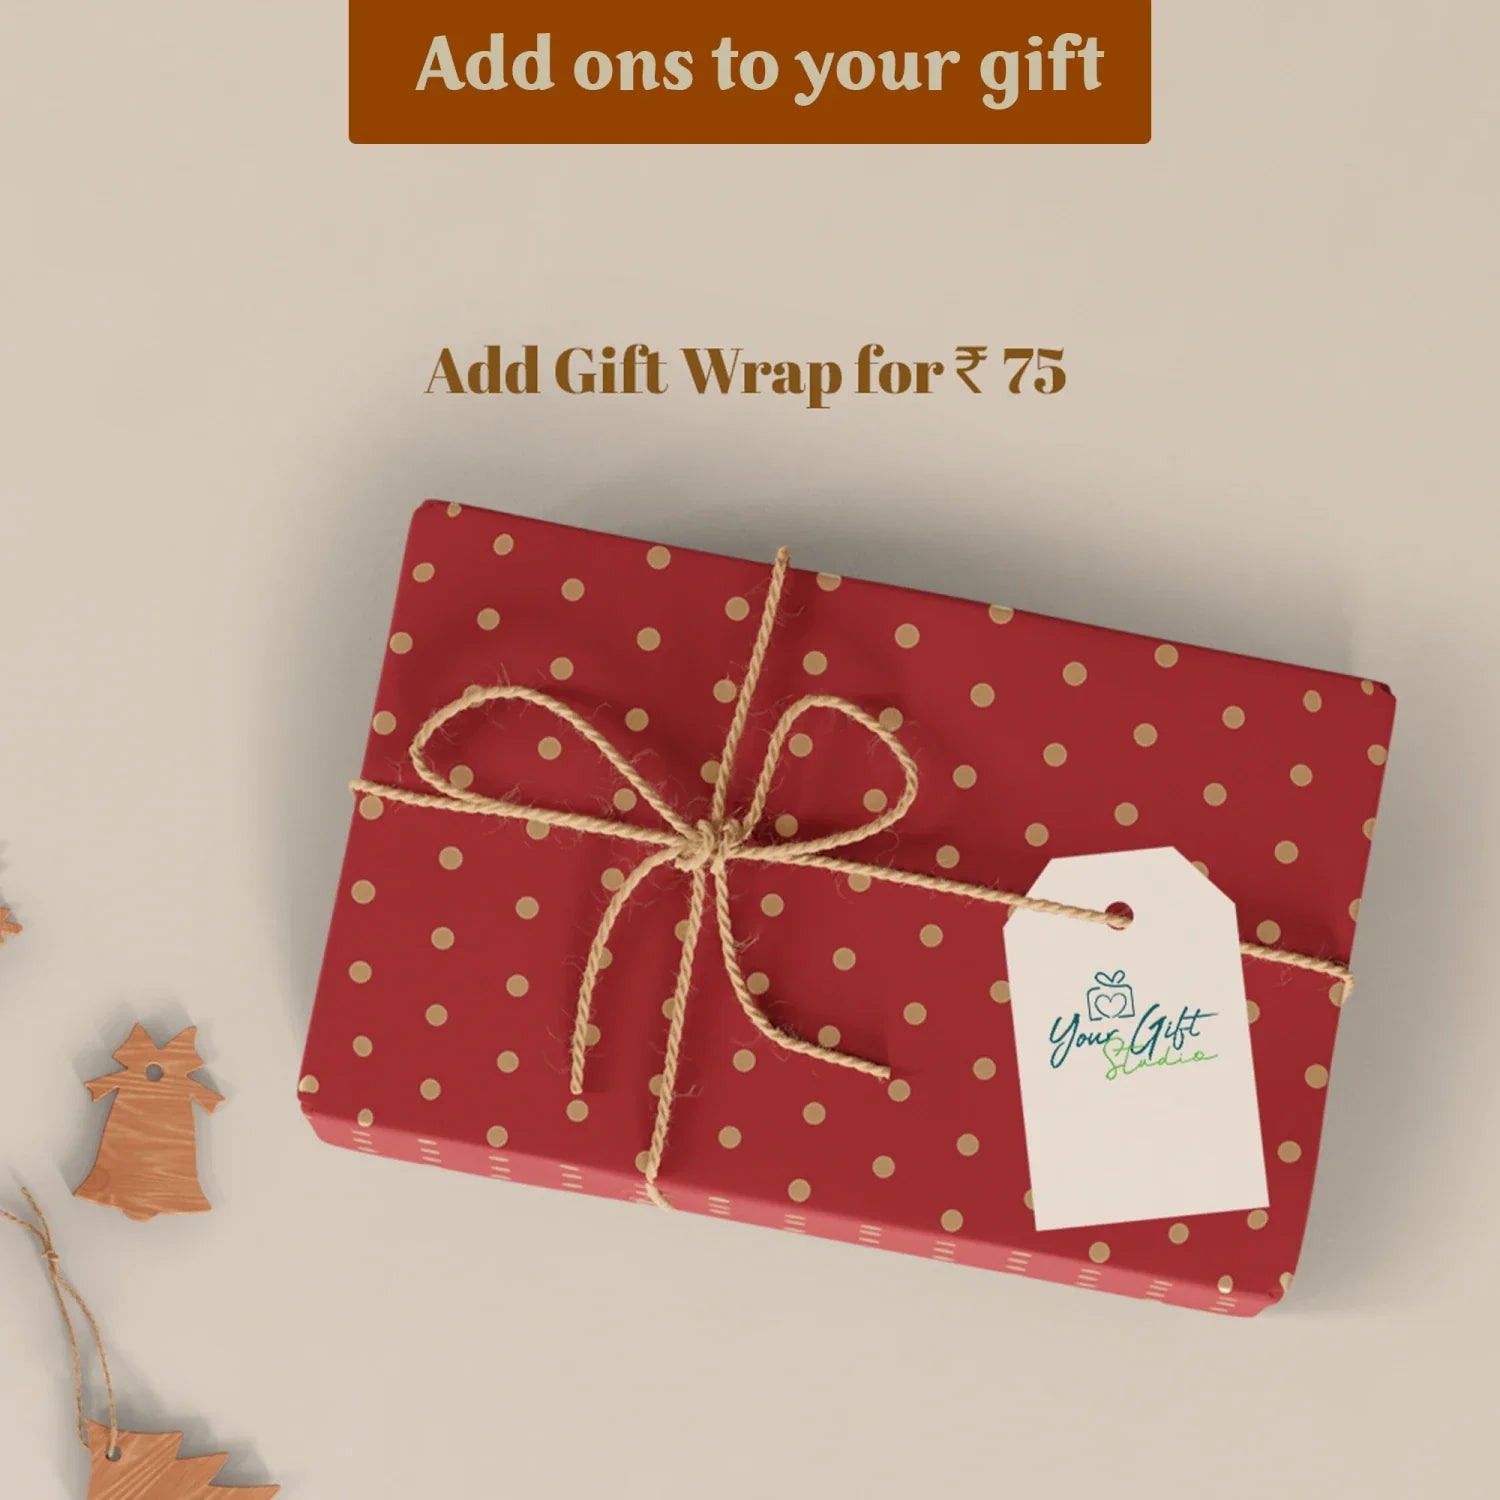 "Pack this gift beautifully and make it perfect for gifting it to your loved ones!  "